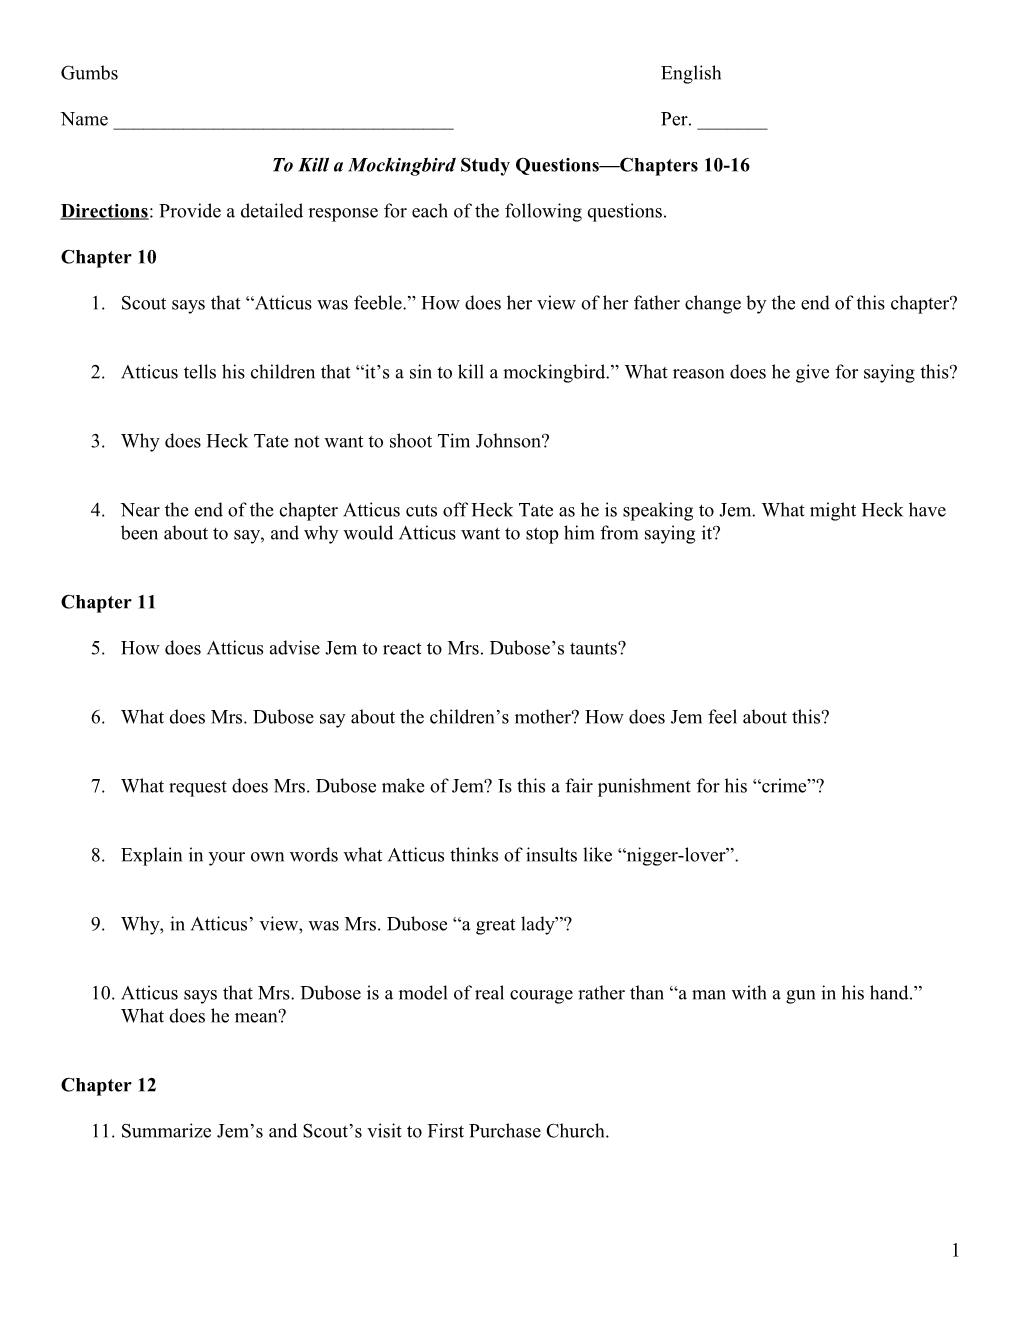 To Kill a Mockingbird Study Questions Chapters 10-16